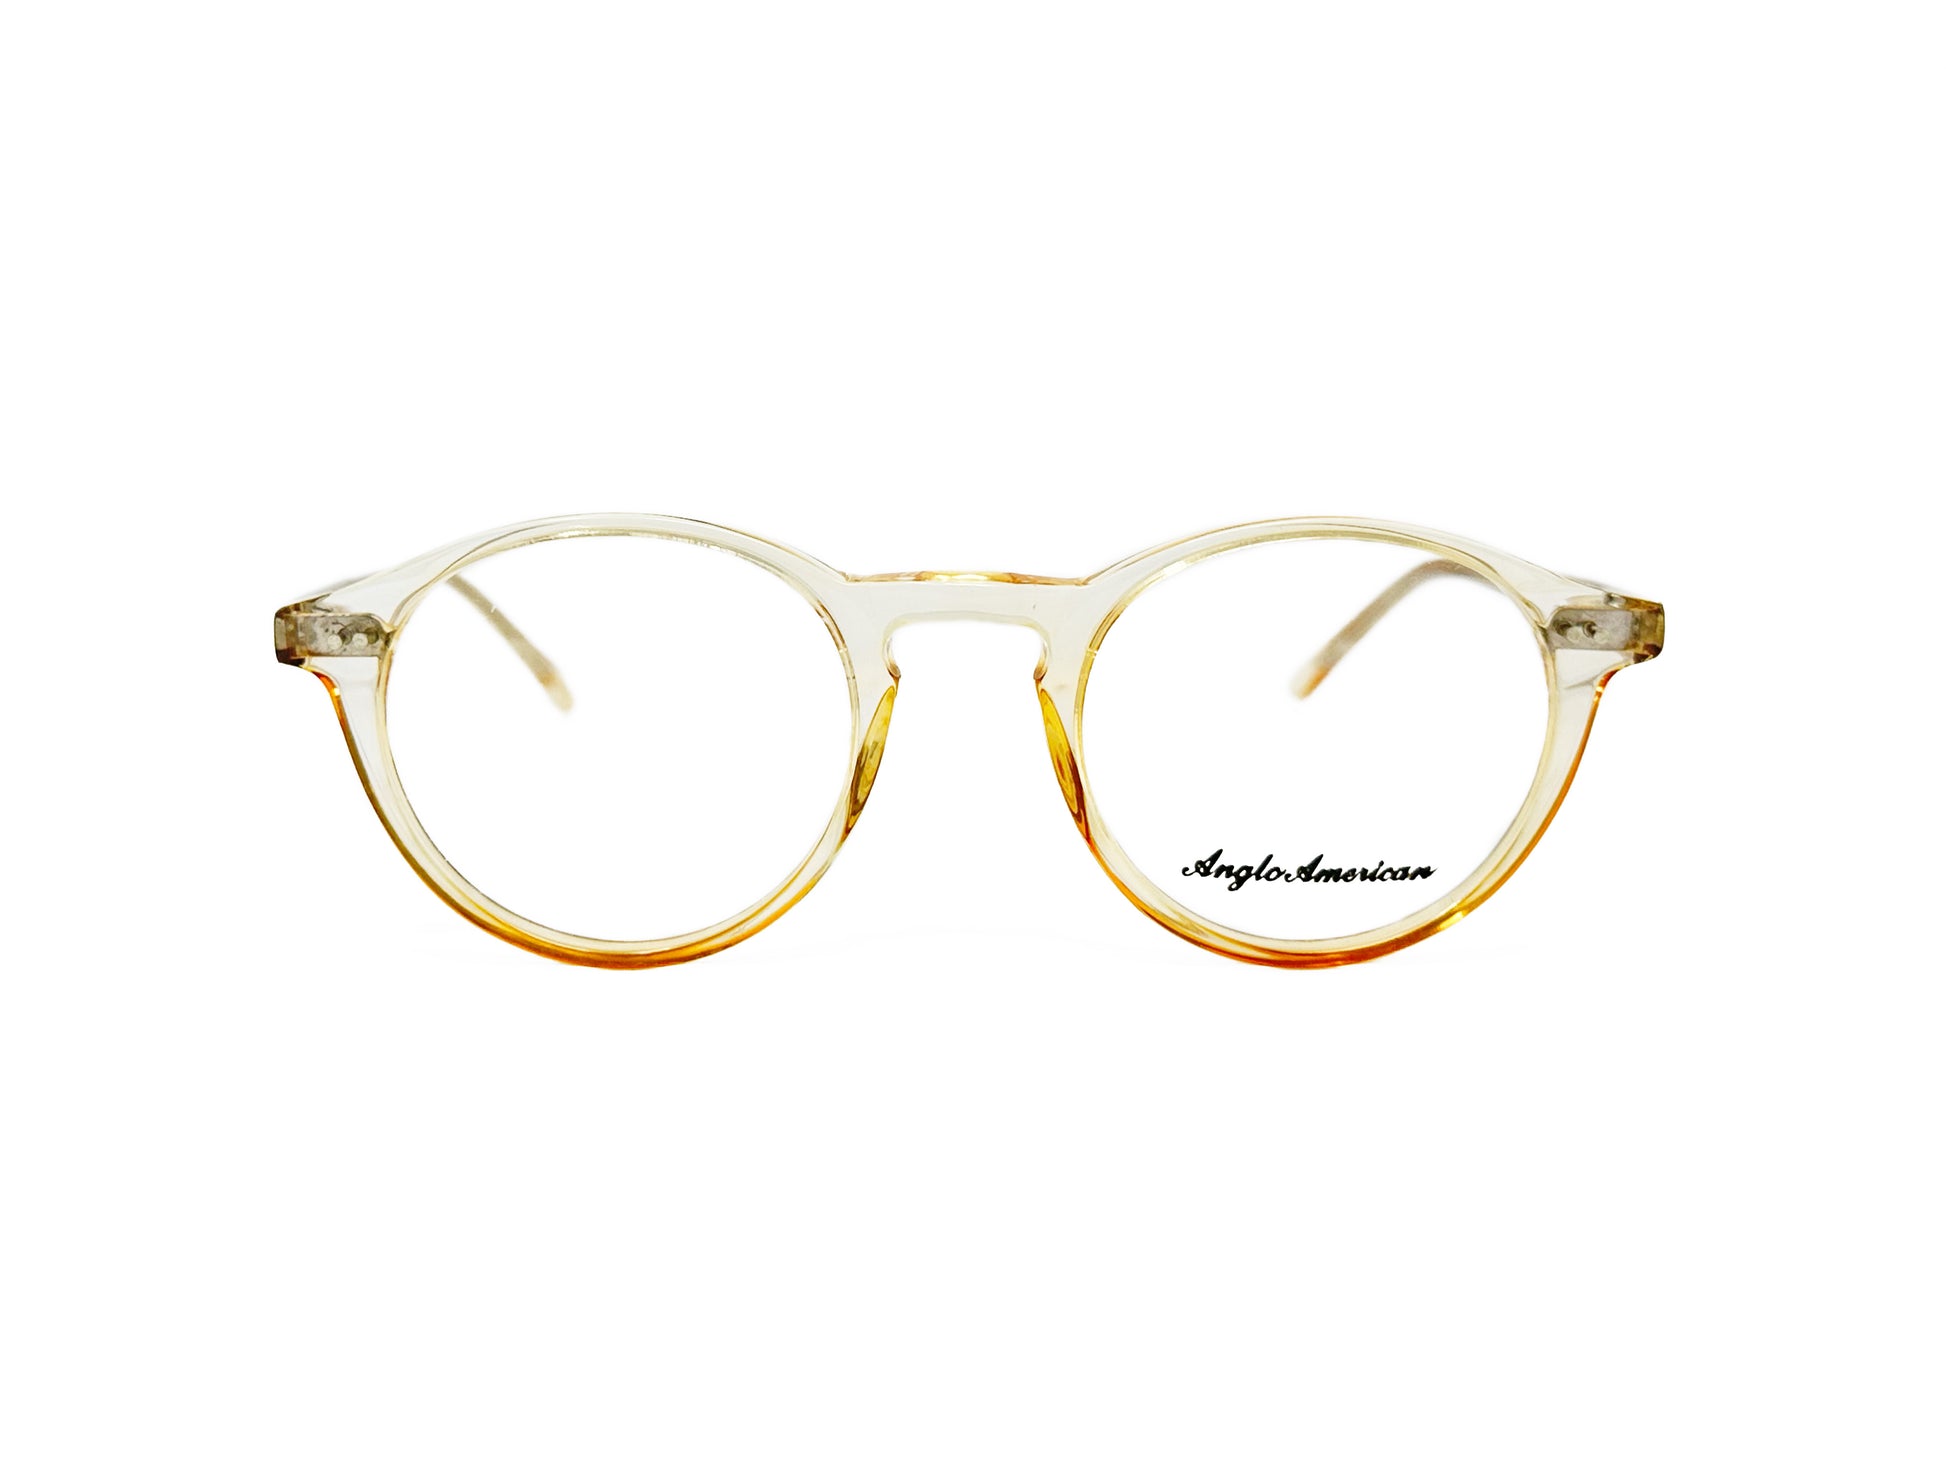 Anglo American Optical round acetate frame. Model: 406. Color: TAN - Transparent tan. Front view.